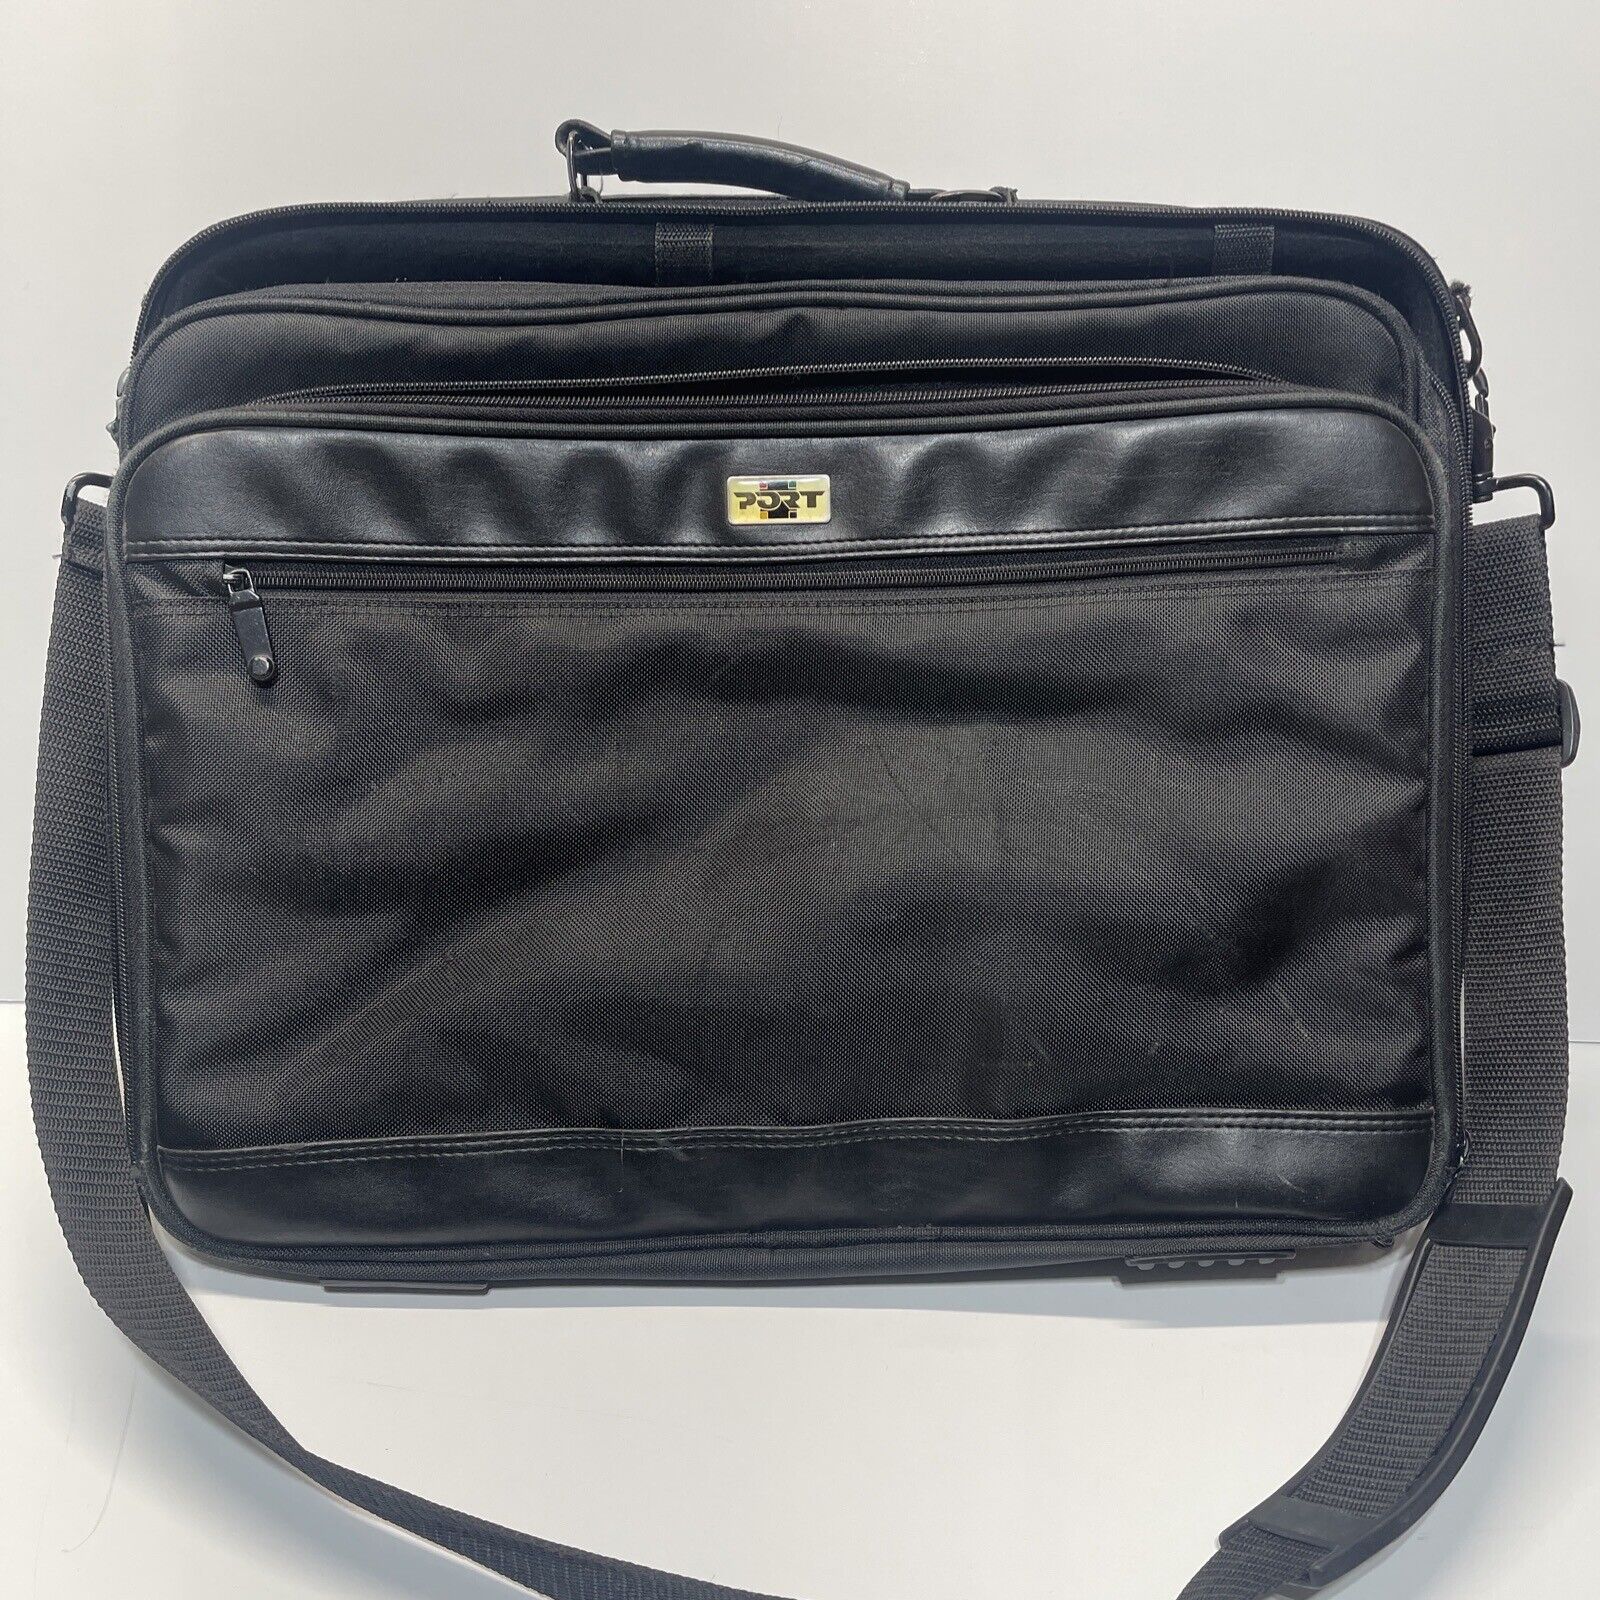 Port Noteworthy Executive Canvas And Leather black Briefcase Laptop Carrier Bag.